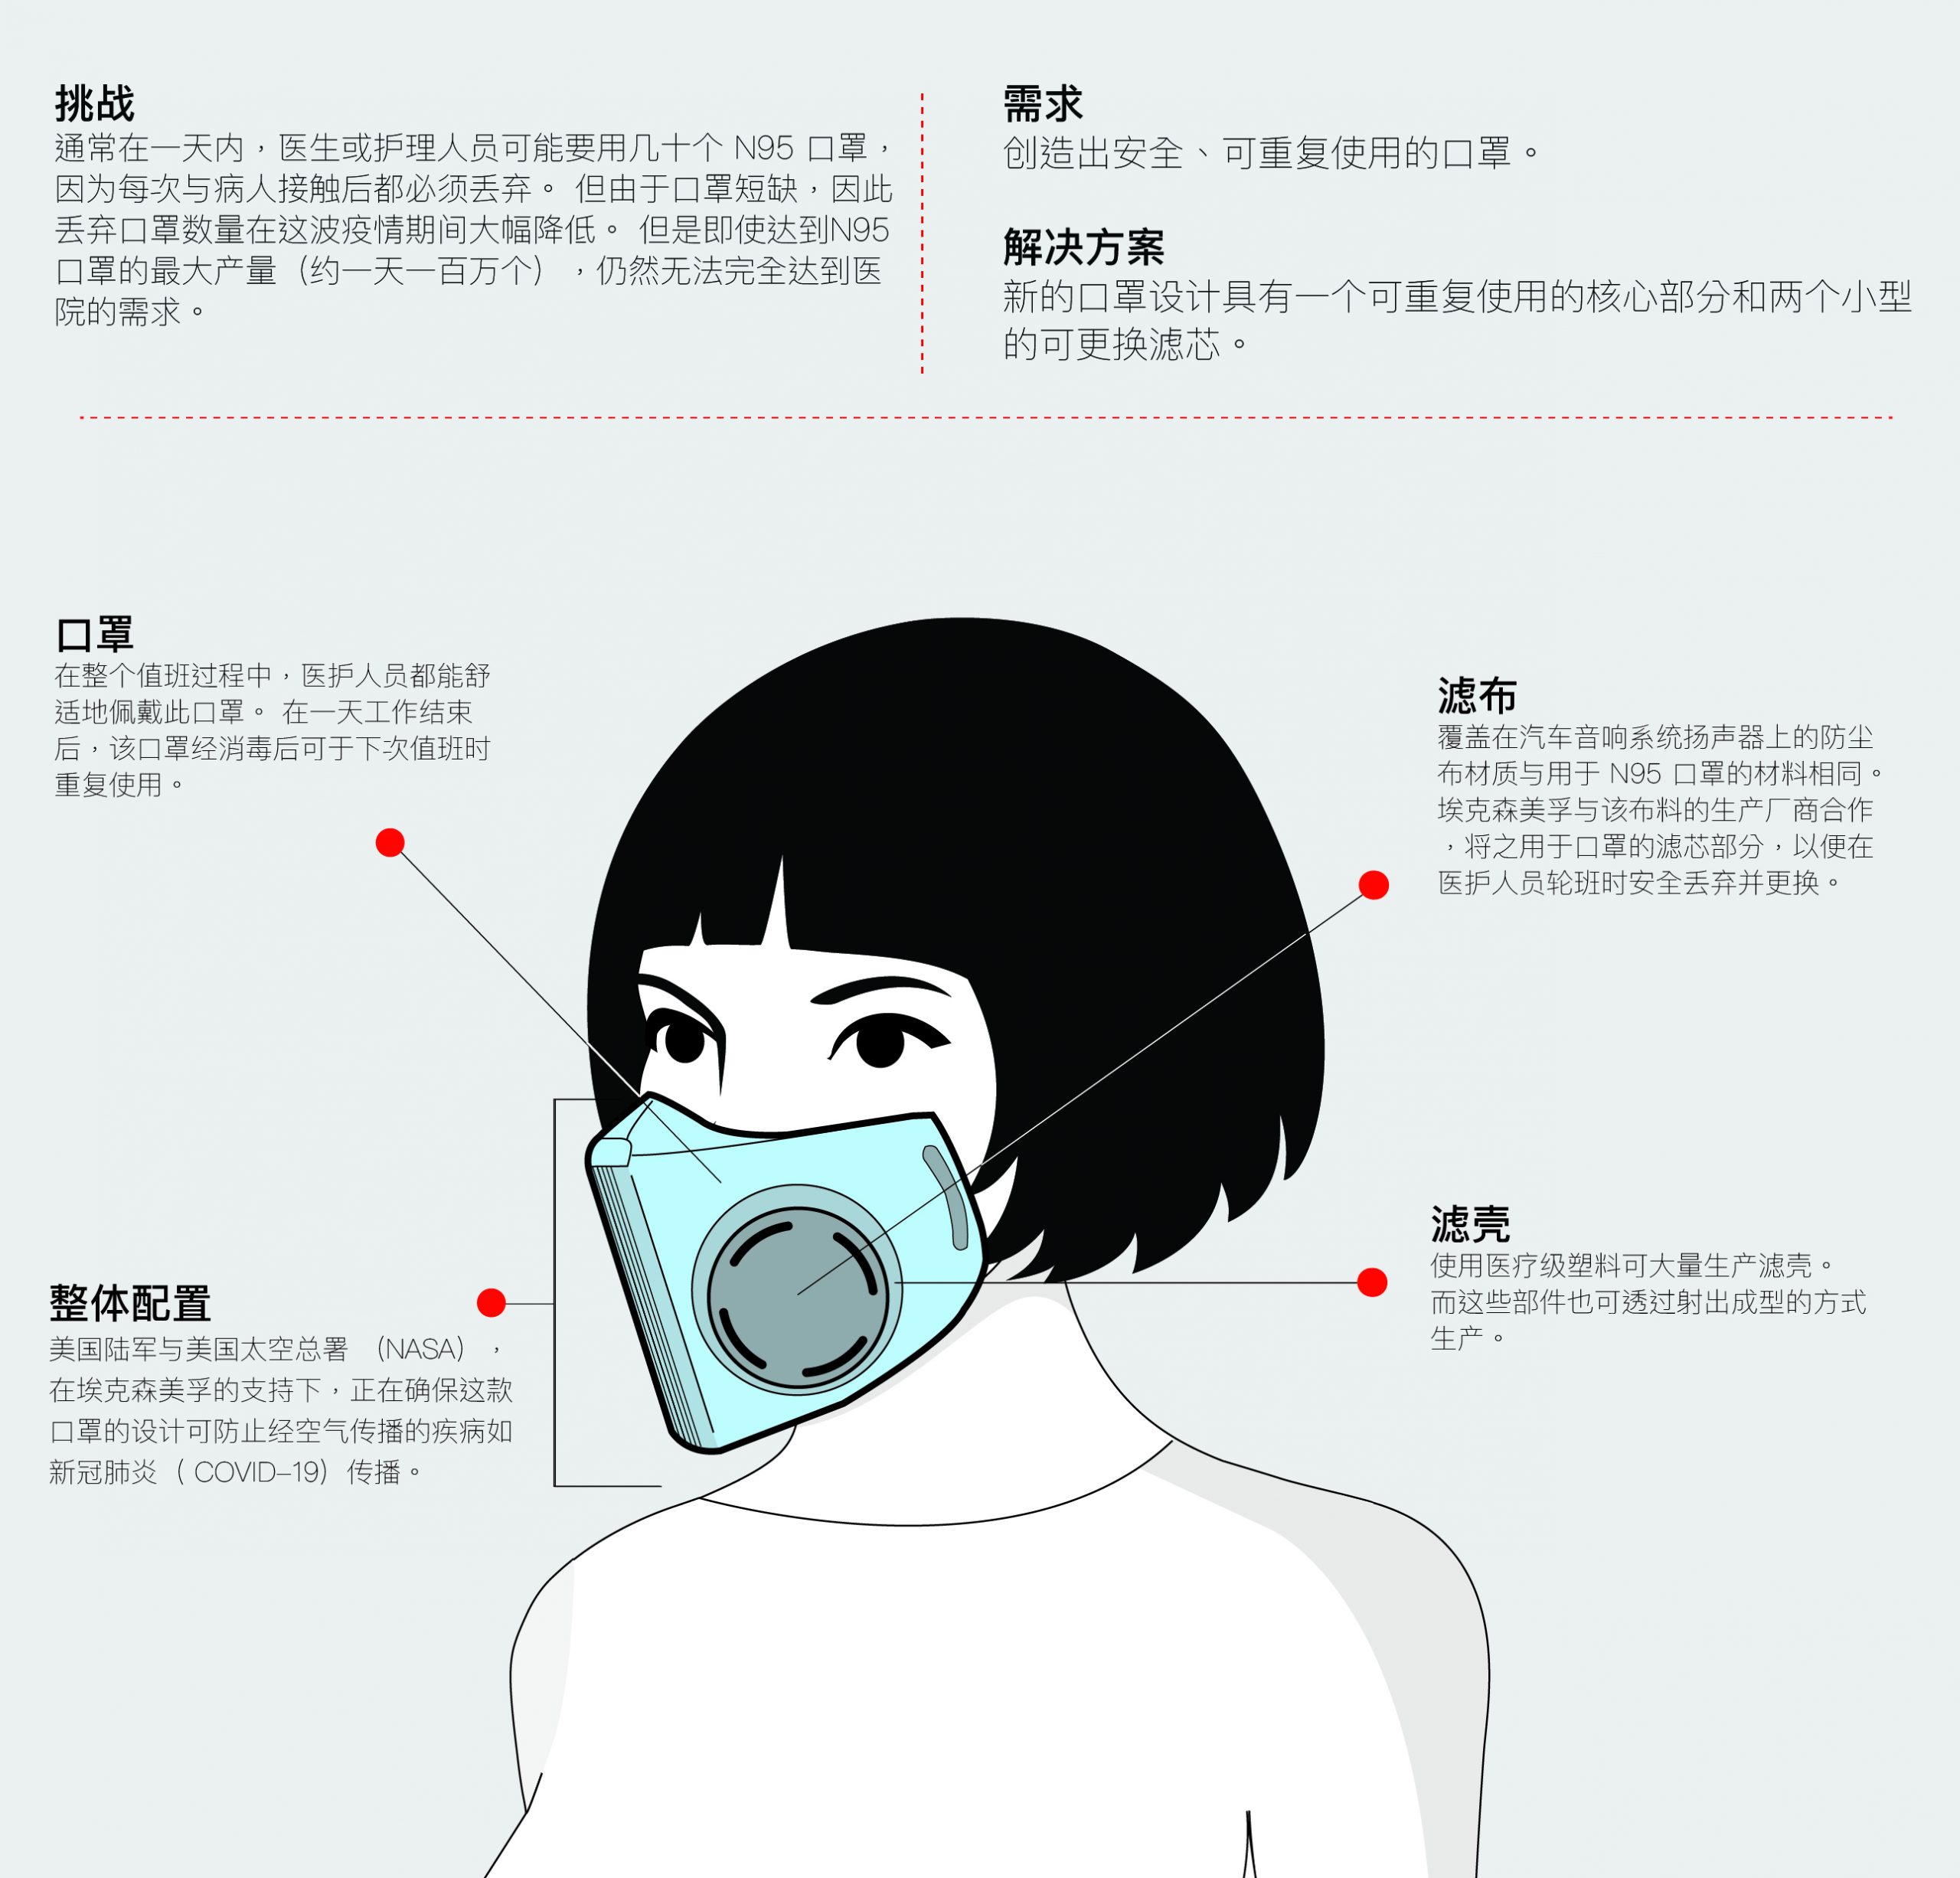 Infographic explaining mask features